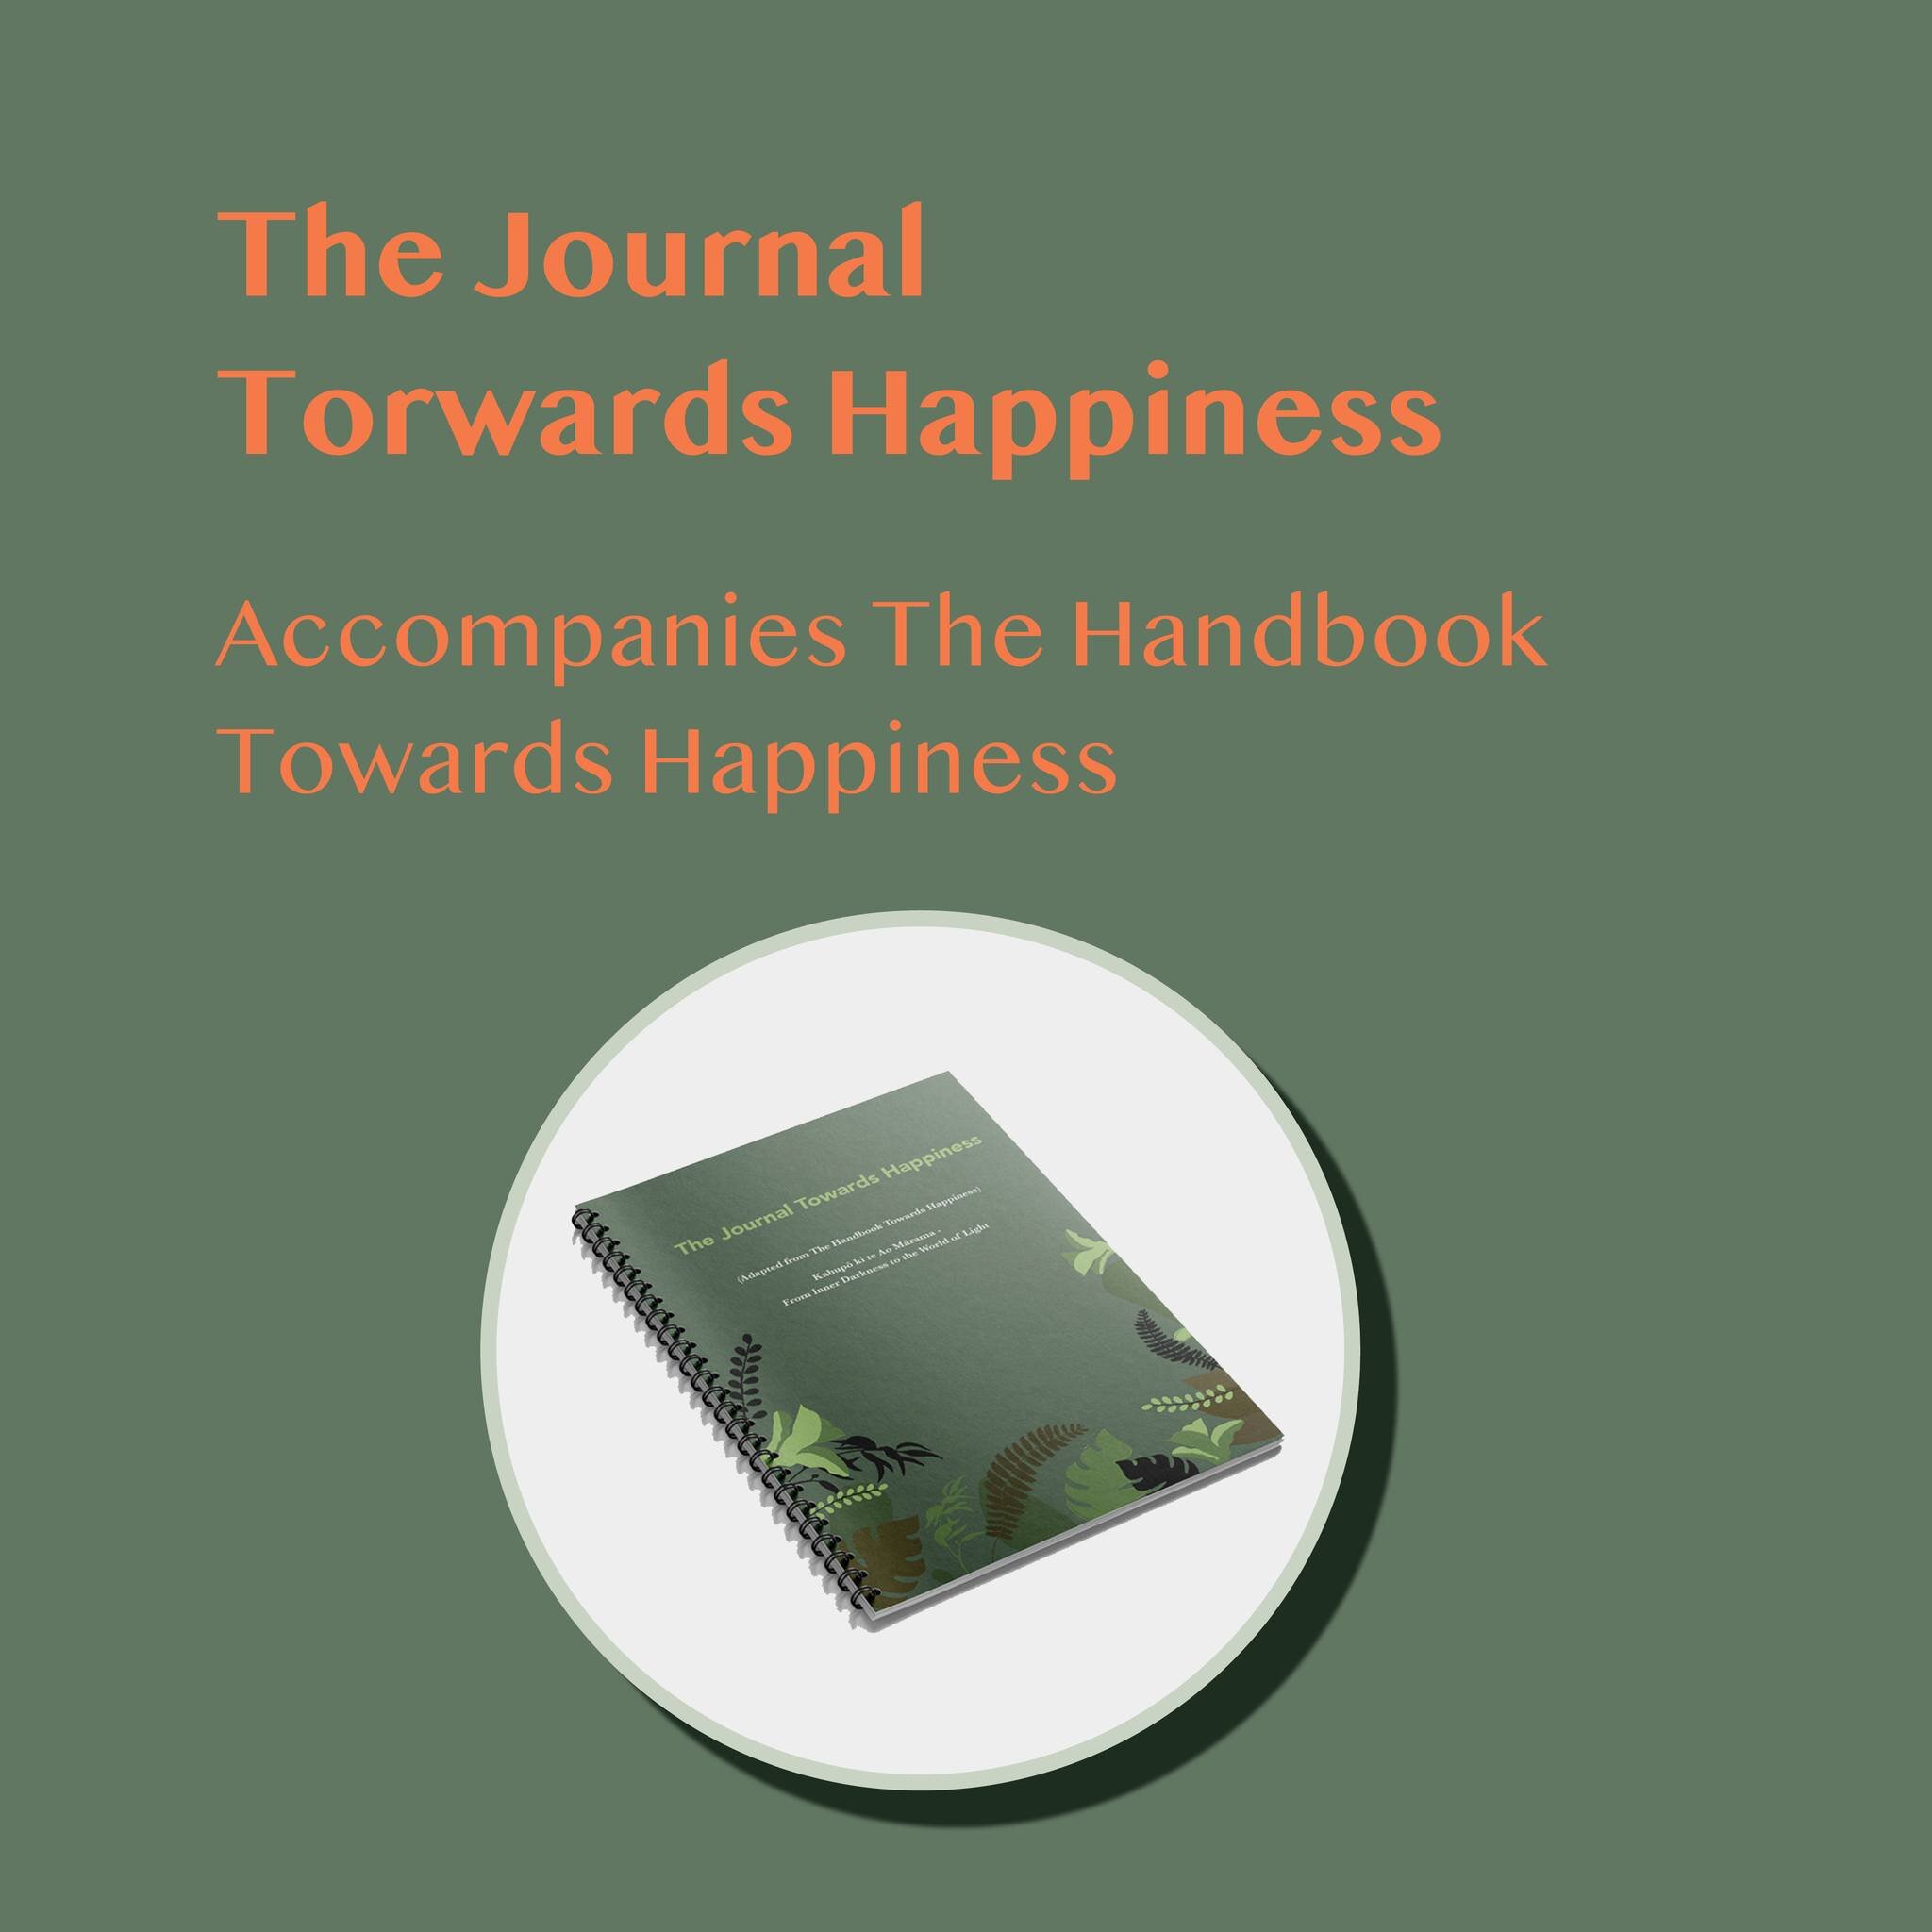 The Journal Towards Happiness is available on our website www.soullearning.co.nz. Purchase it with the online platform to support your journey with your journal. www.soullearning.co.nz